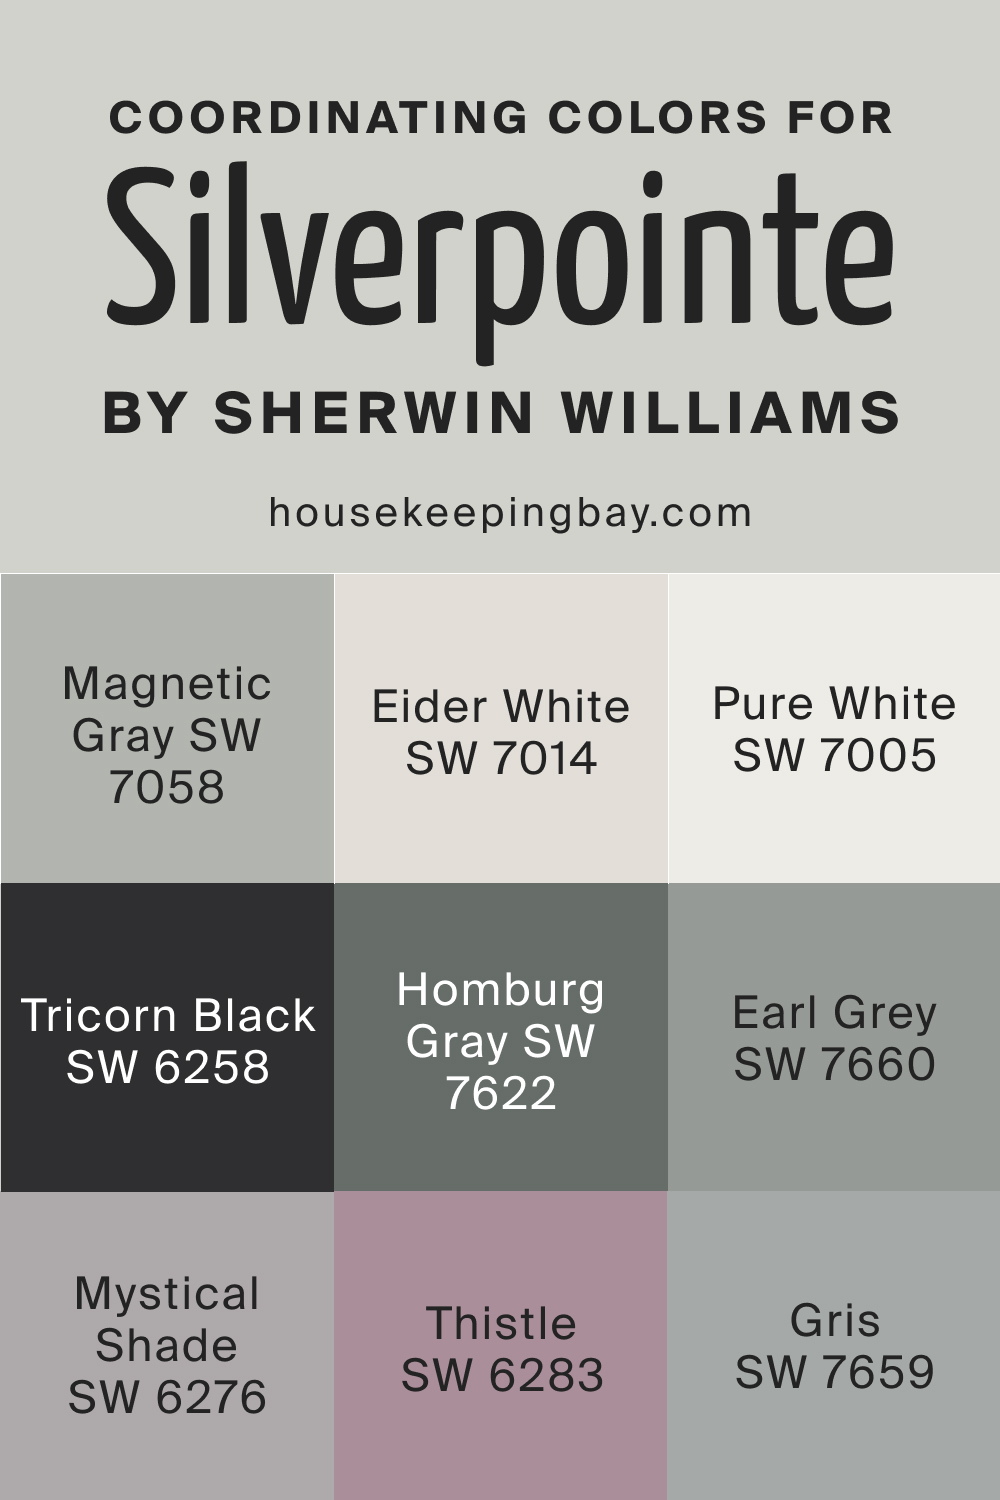 Coordinating Colors for SW Silverpointe by Sherwin Williams